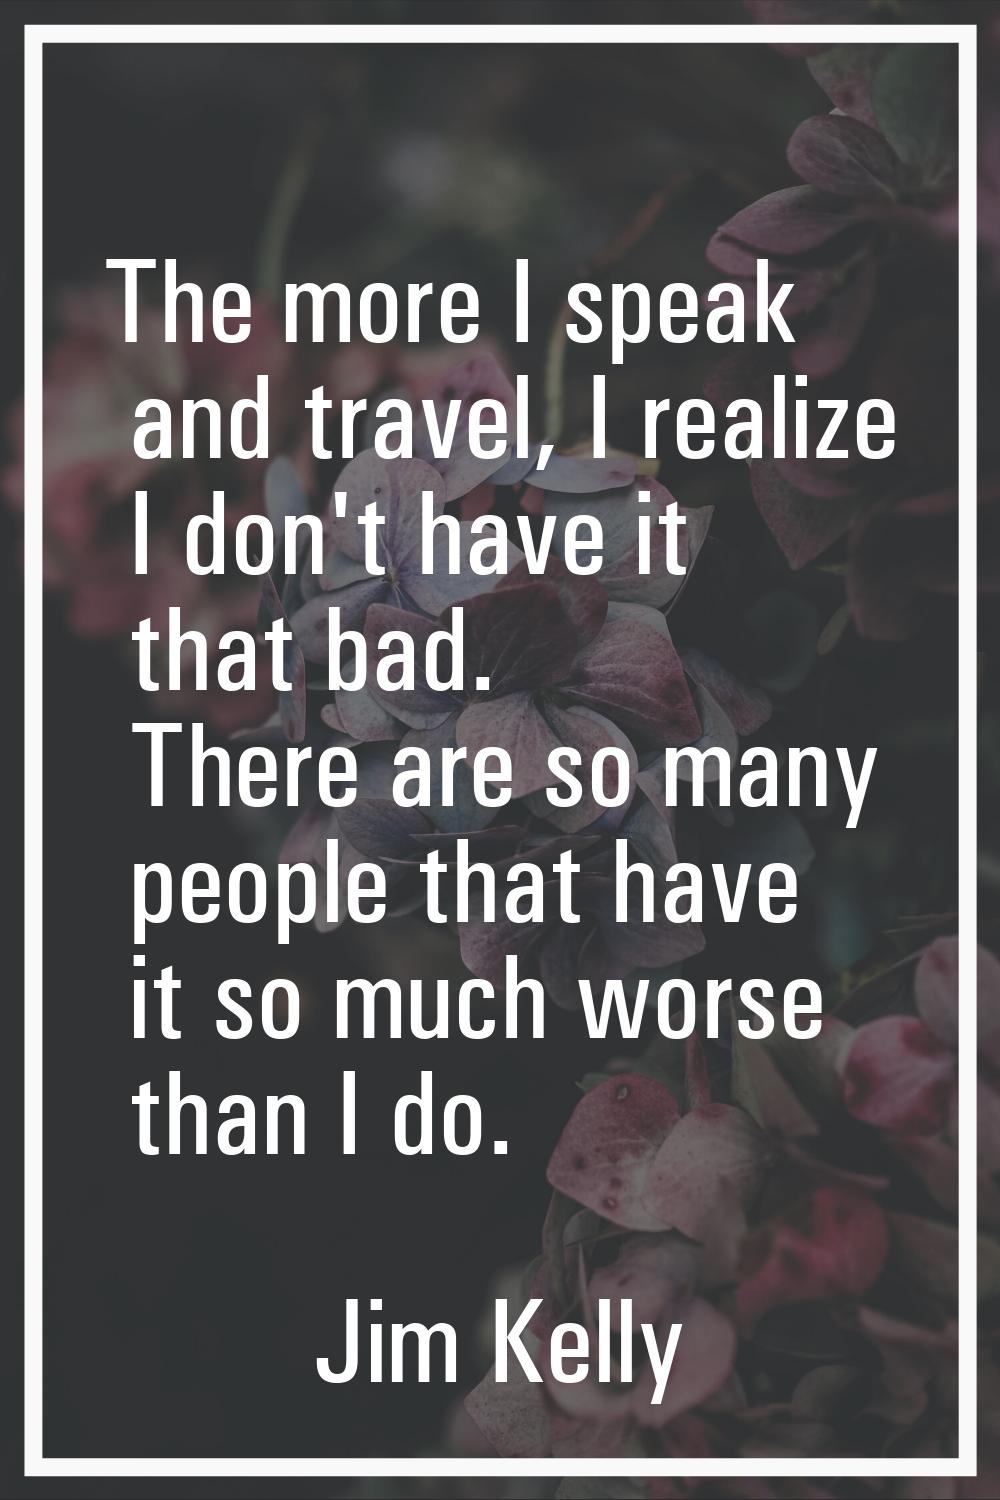 The more I speak and travel, I realize I don't have it that bad. There are so many people that have